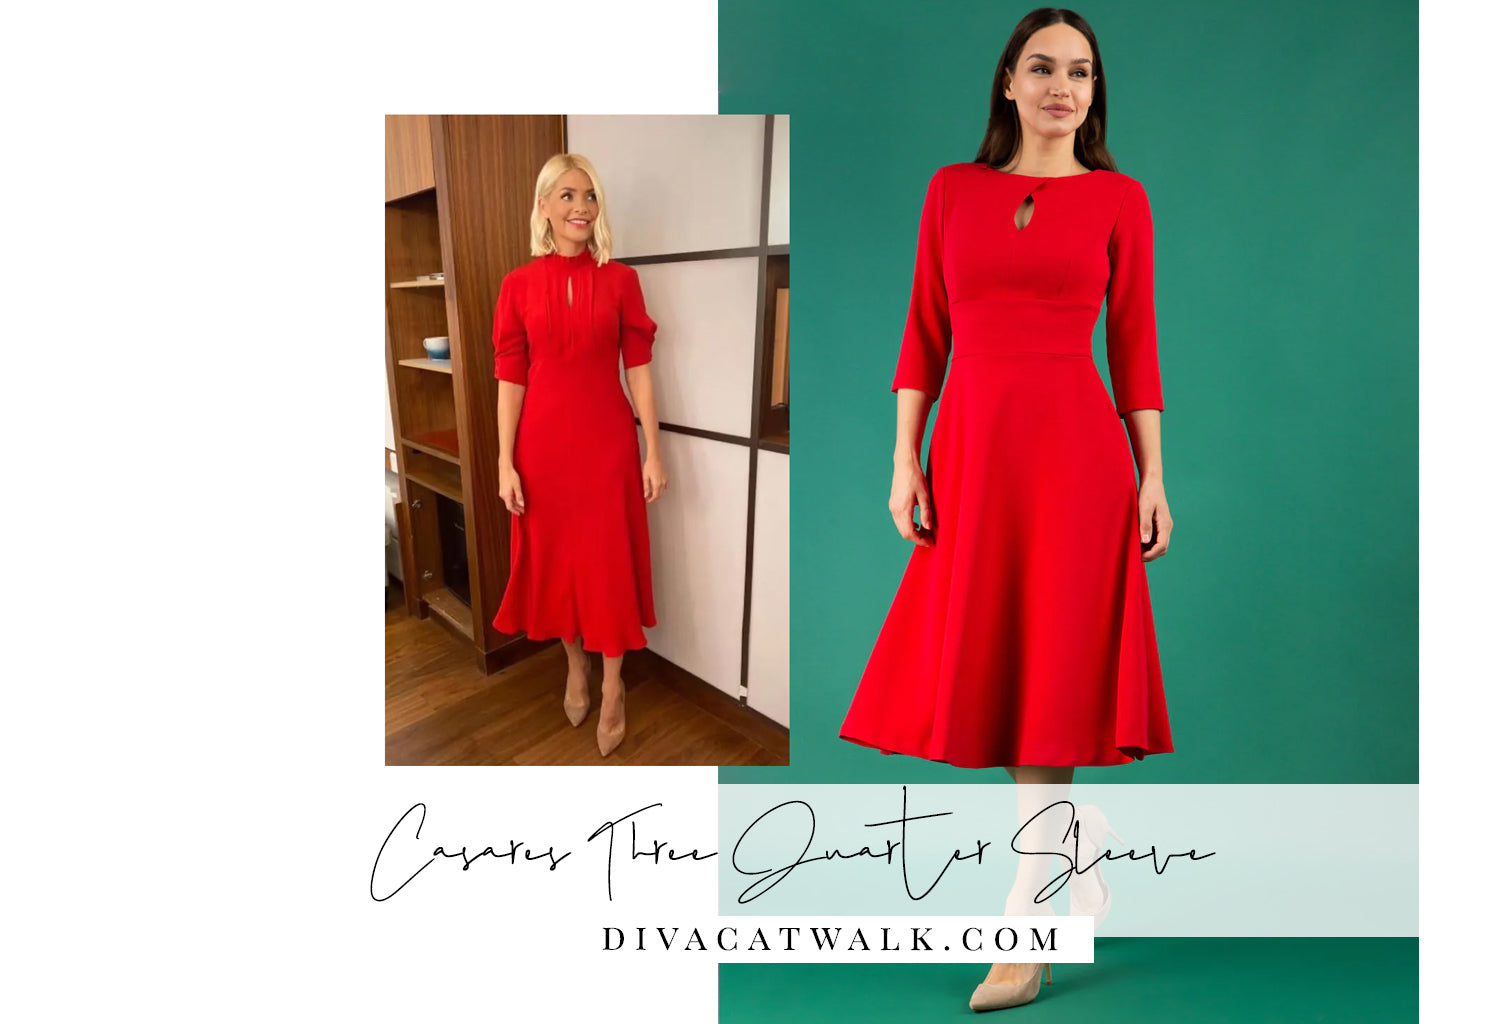  holly willoughby pictured in an red swing dress, with an attached image of a similar dress available from Diva Catwalk called Casares.